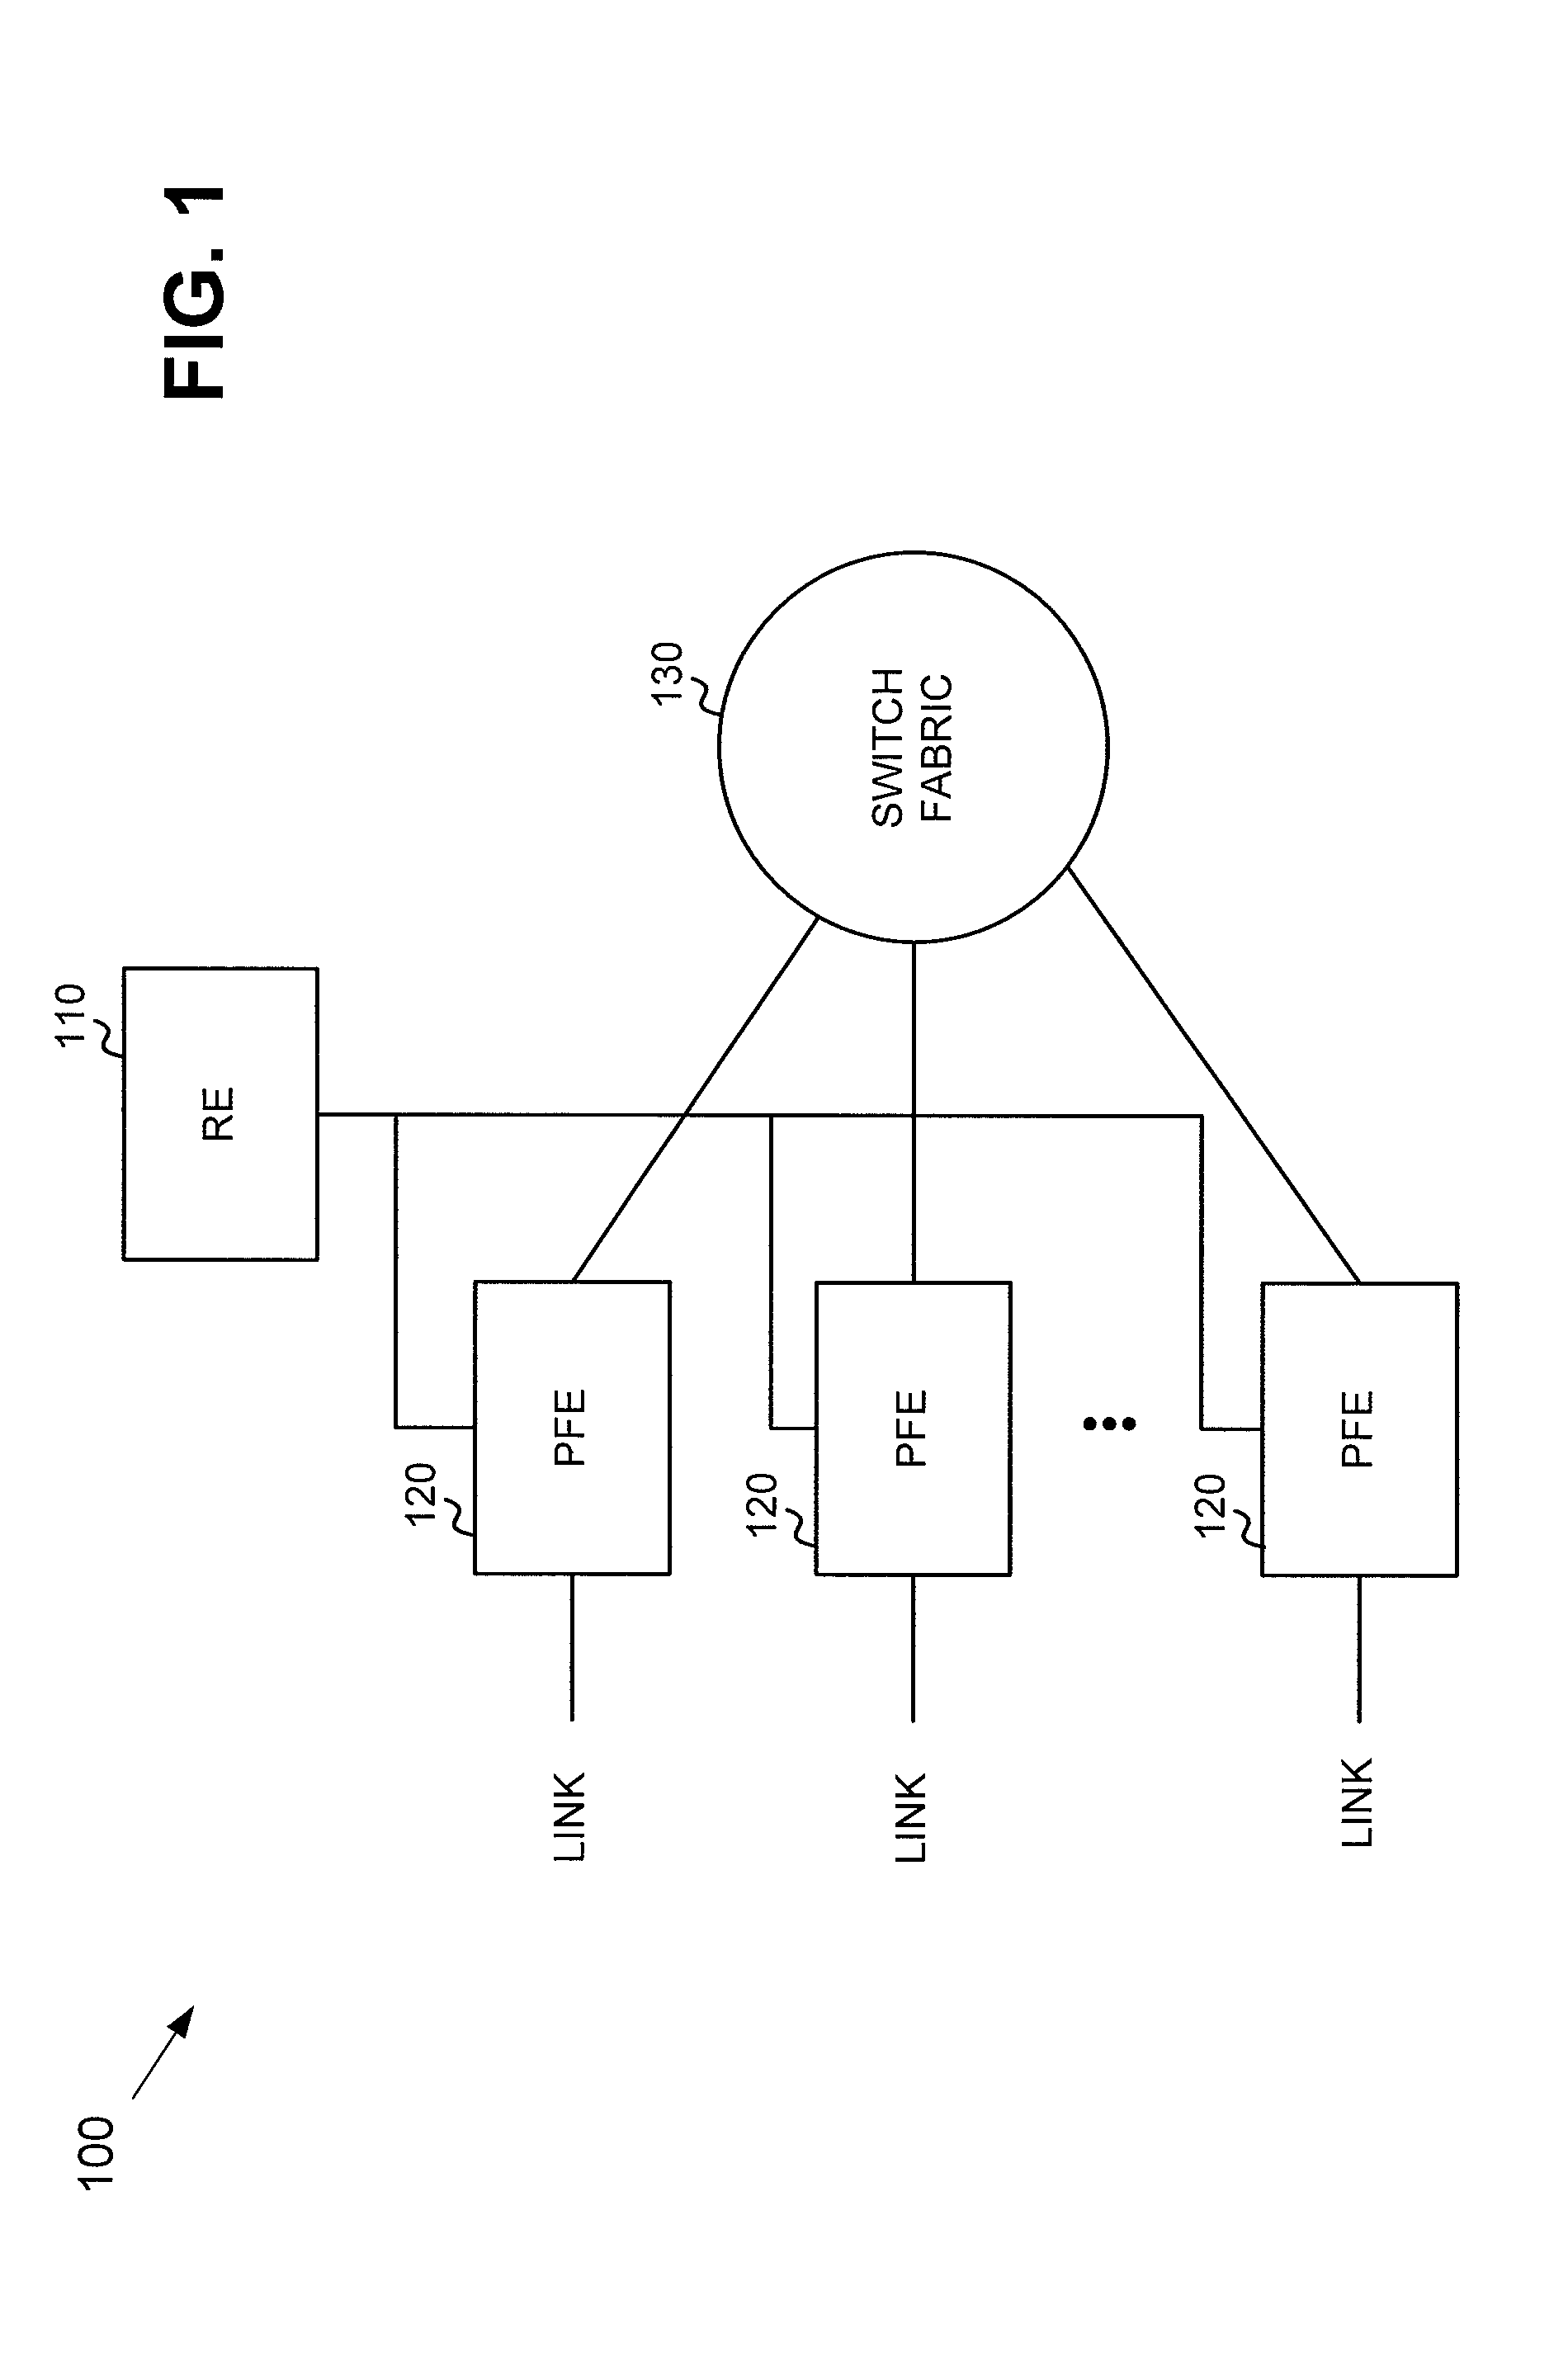 Dequeuing and congestion control systems and methods